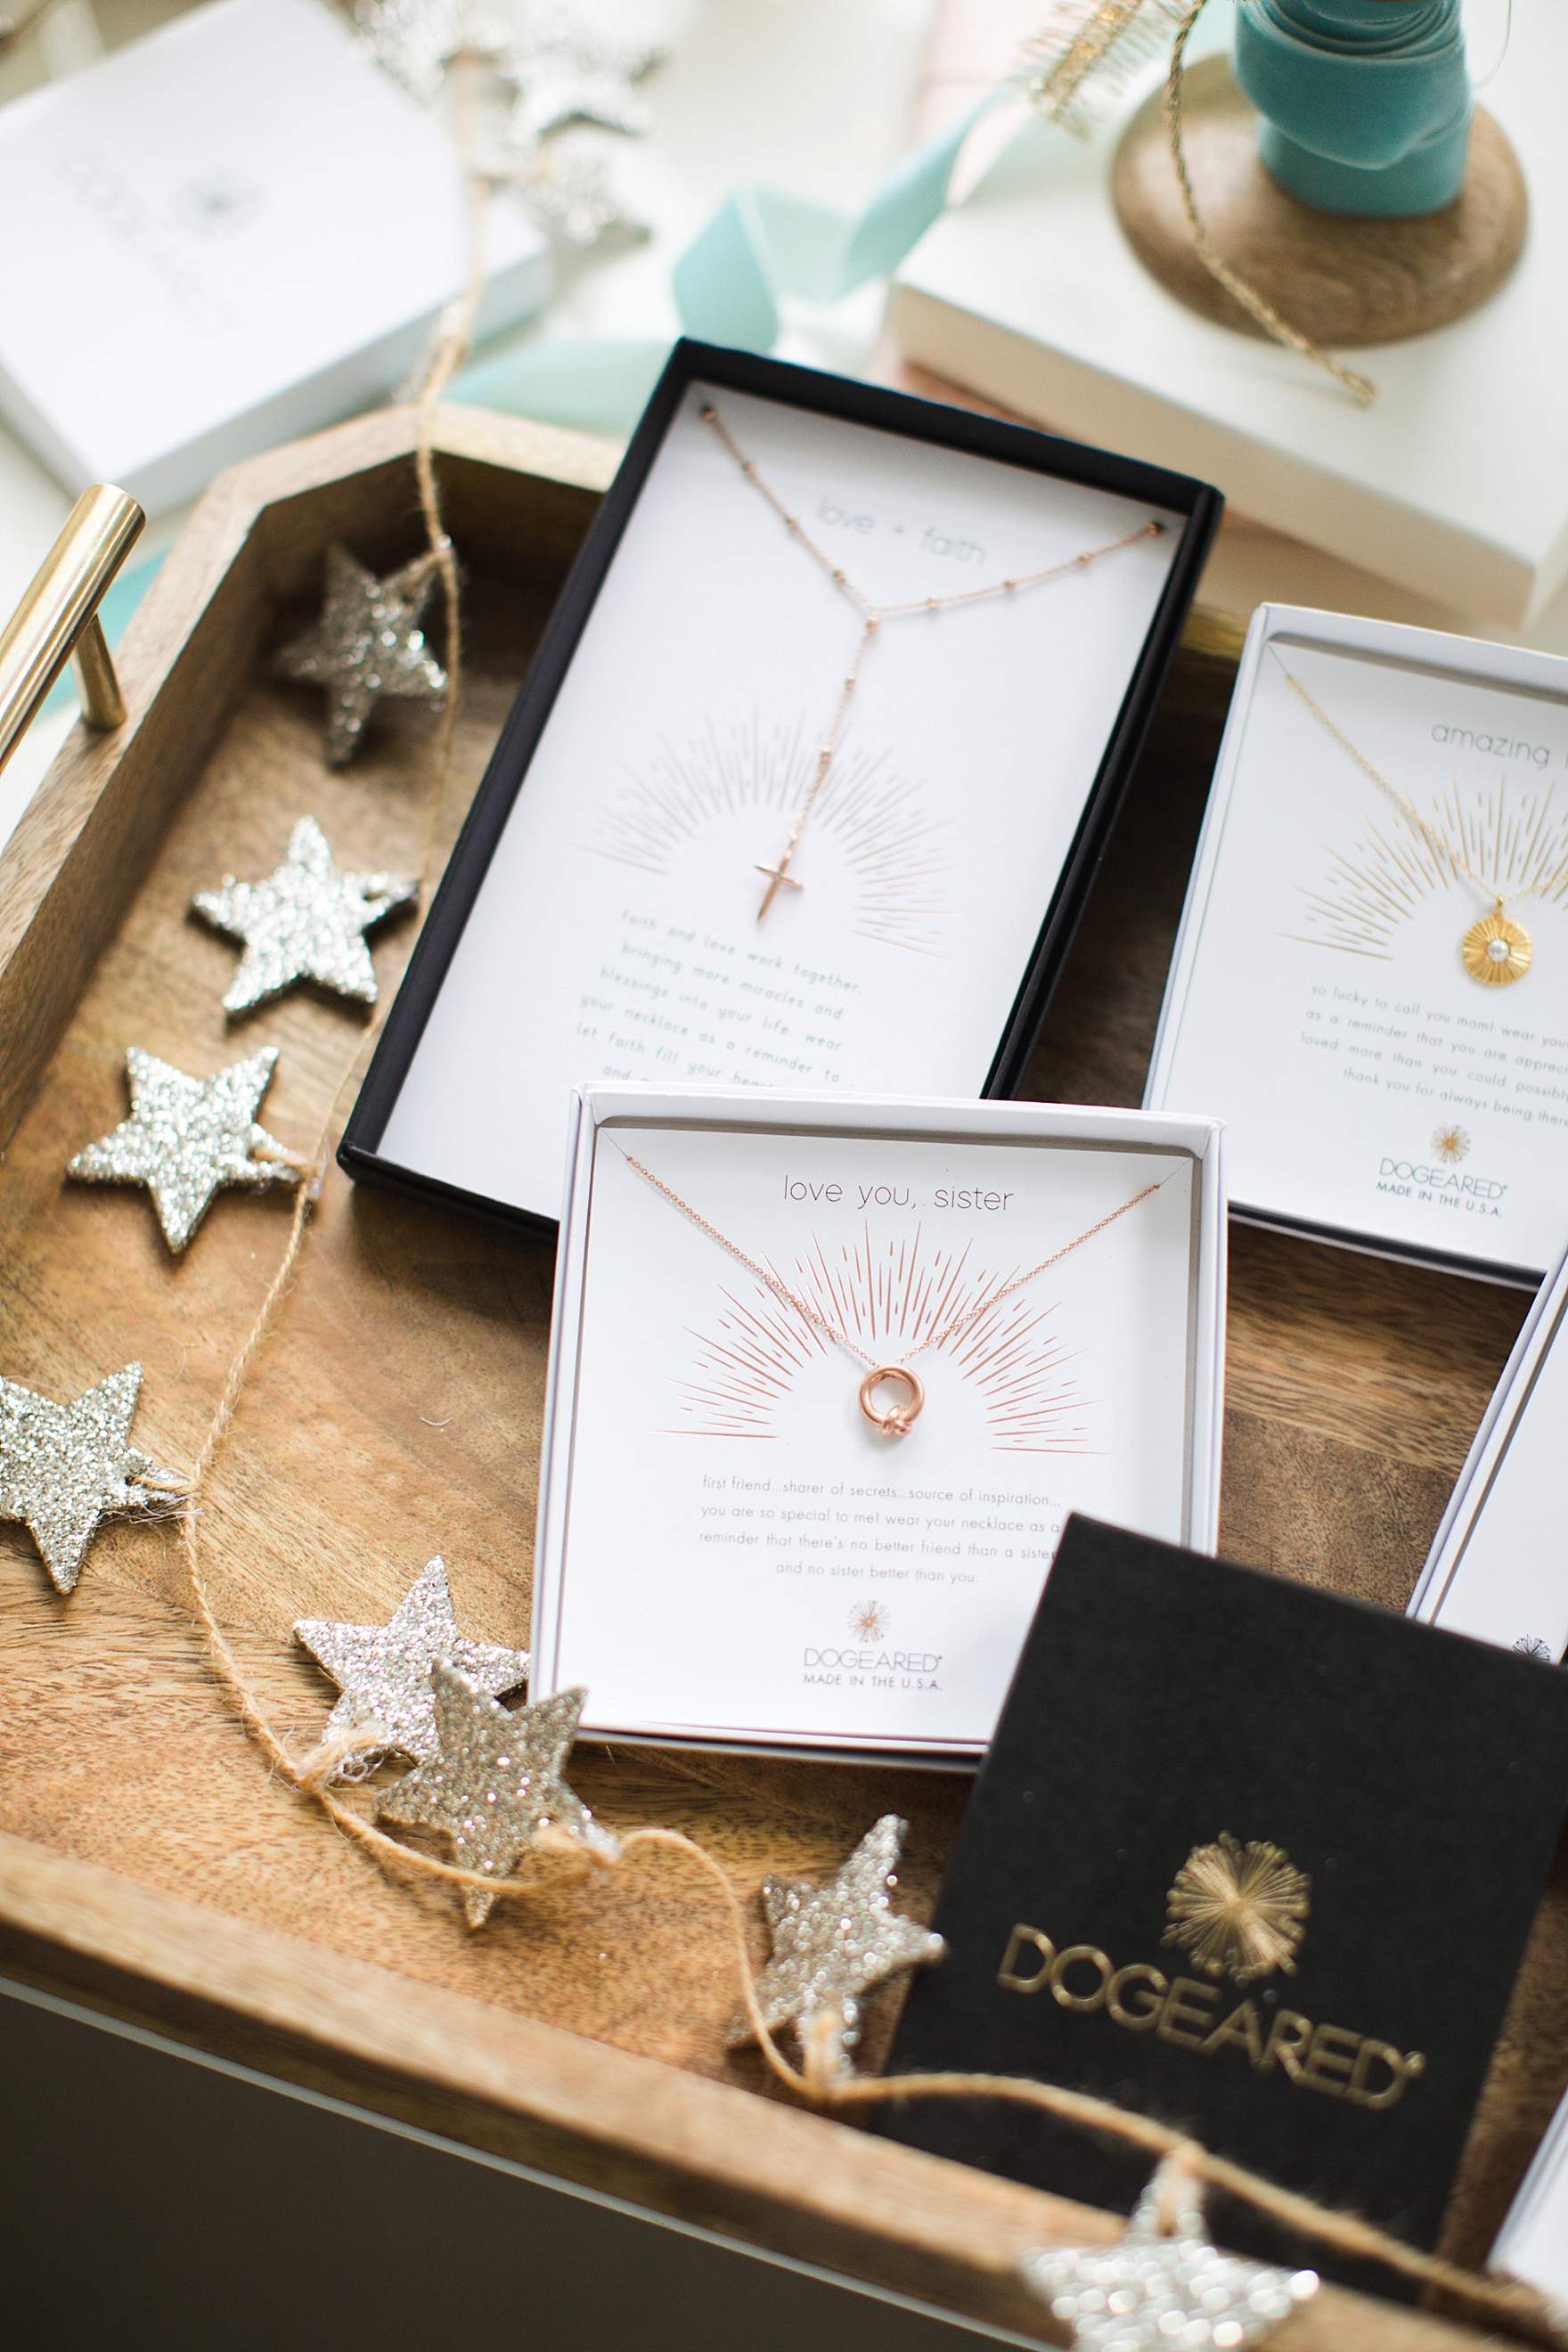 dainty necklaces gold, rose gold or silver plated by Dogeared good for holiday gifting for occasions and comes on a card that has an inspirational message